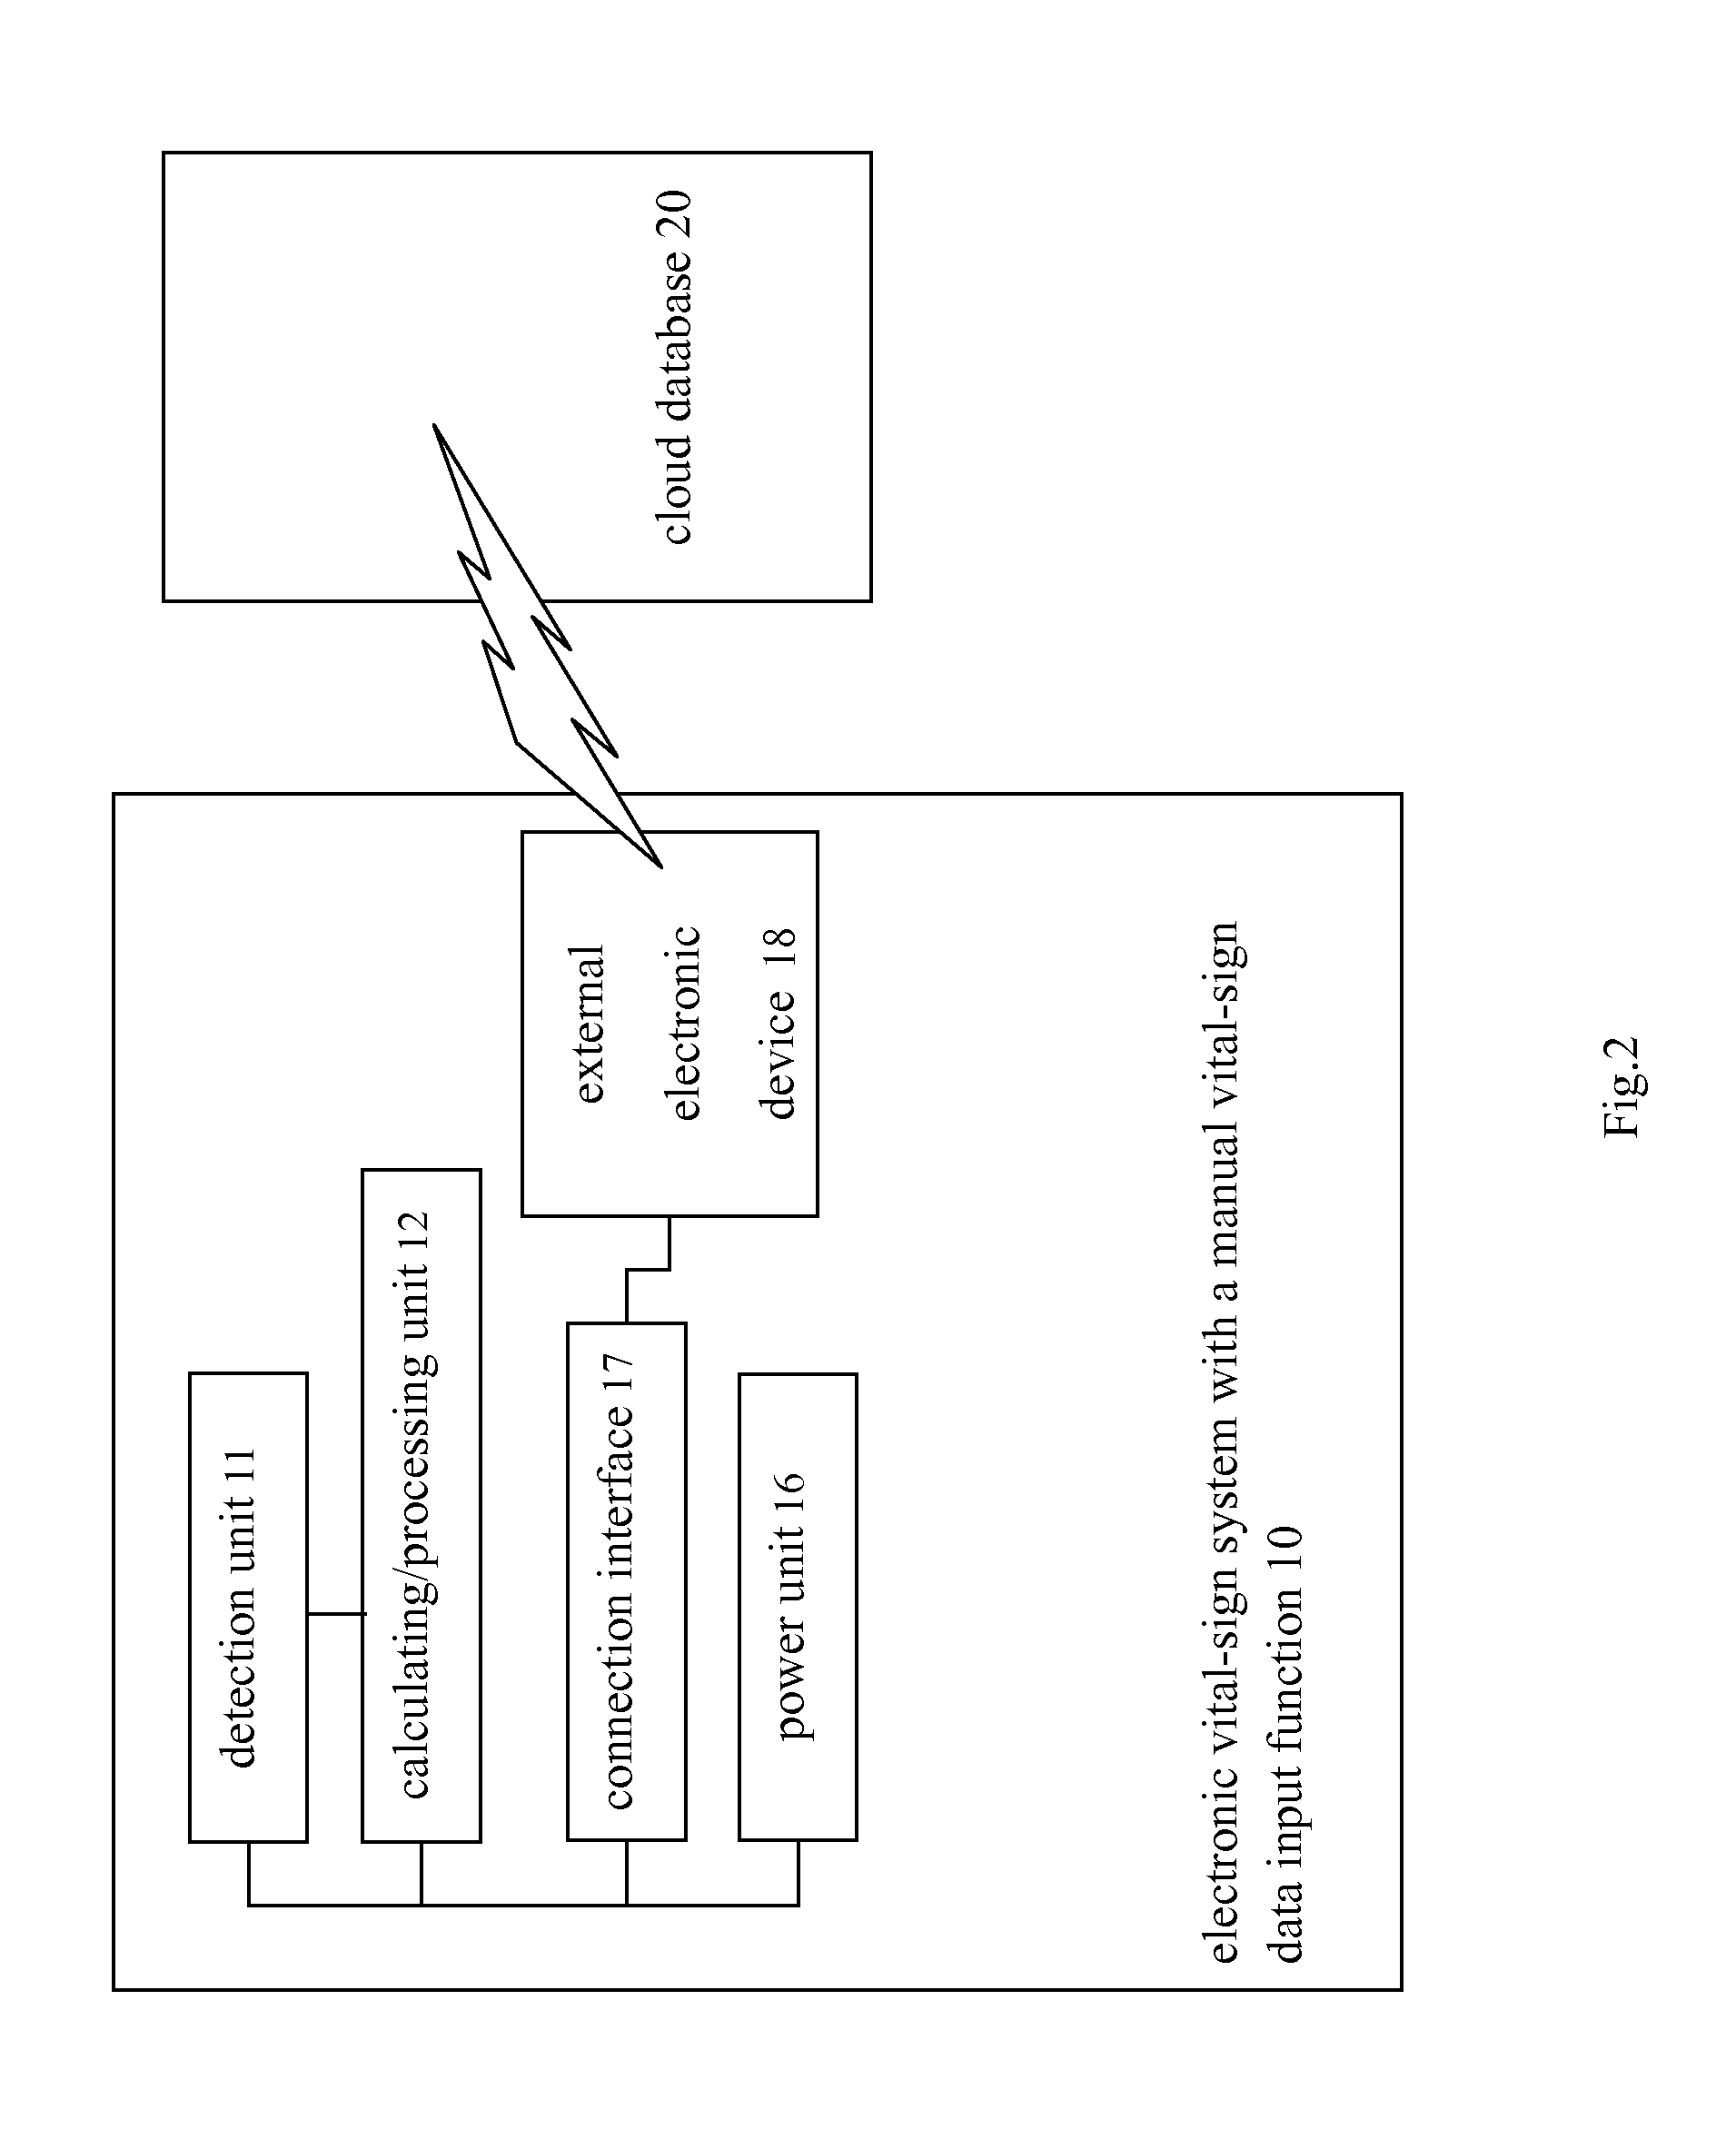 Electronic vital-sign system with a manual vital-sign data input function